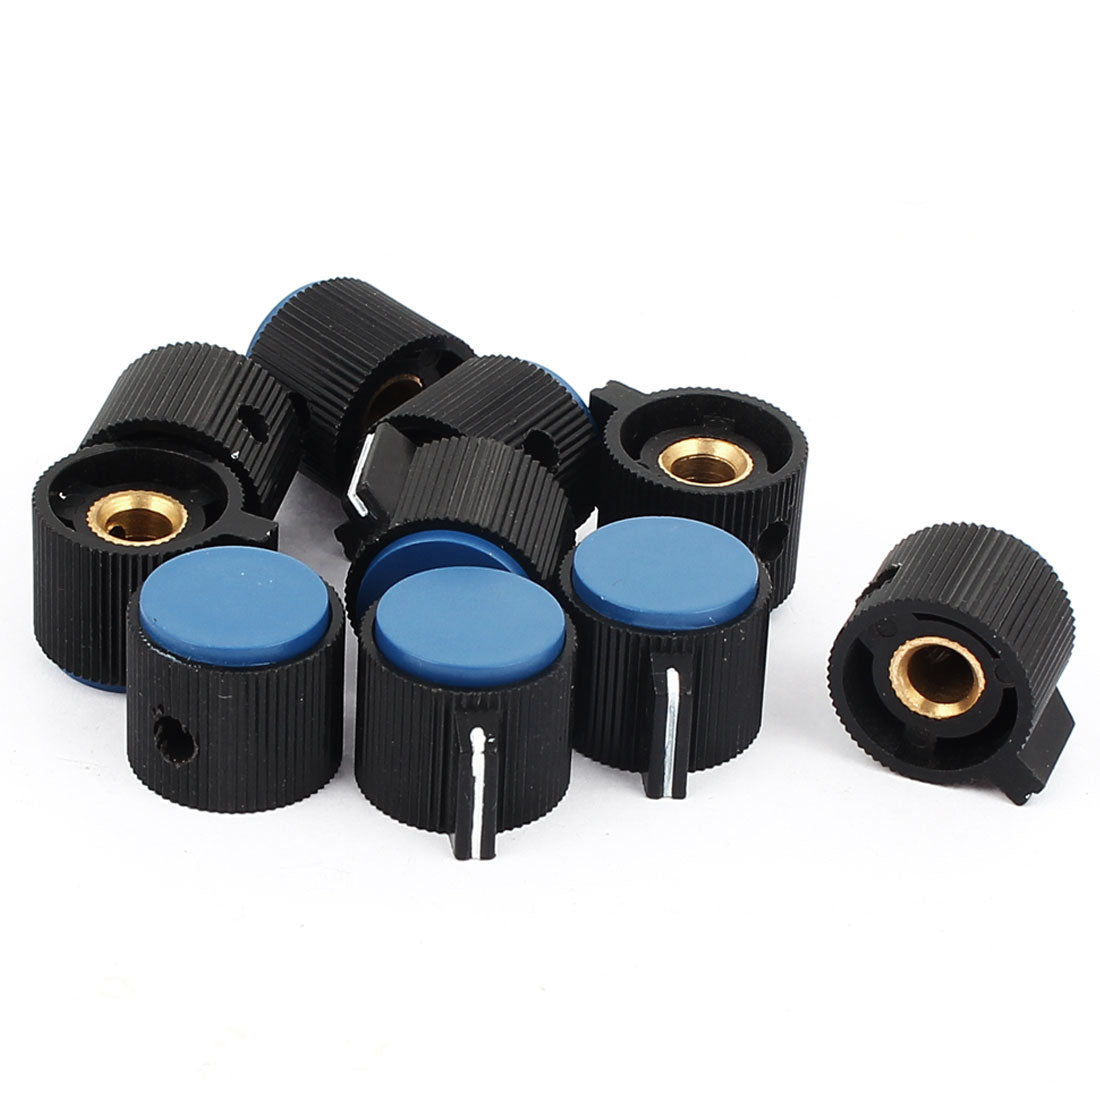 uxcell Uxcell 10pcs Plastic Volume Control Rotary Switch Potentiometer Knob Cover for 6mm Knurled Shaft